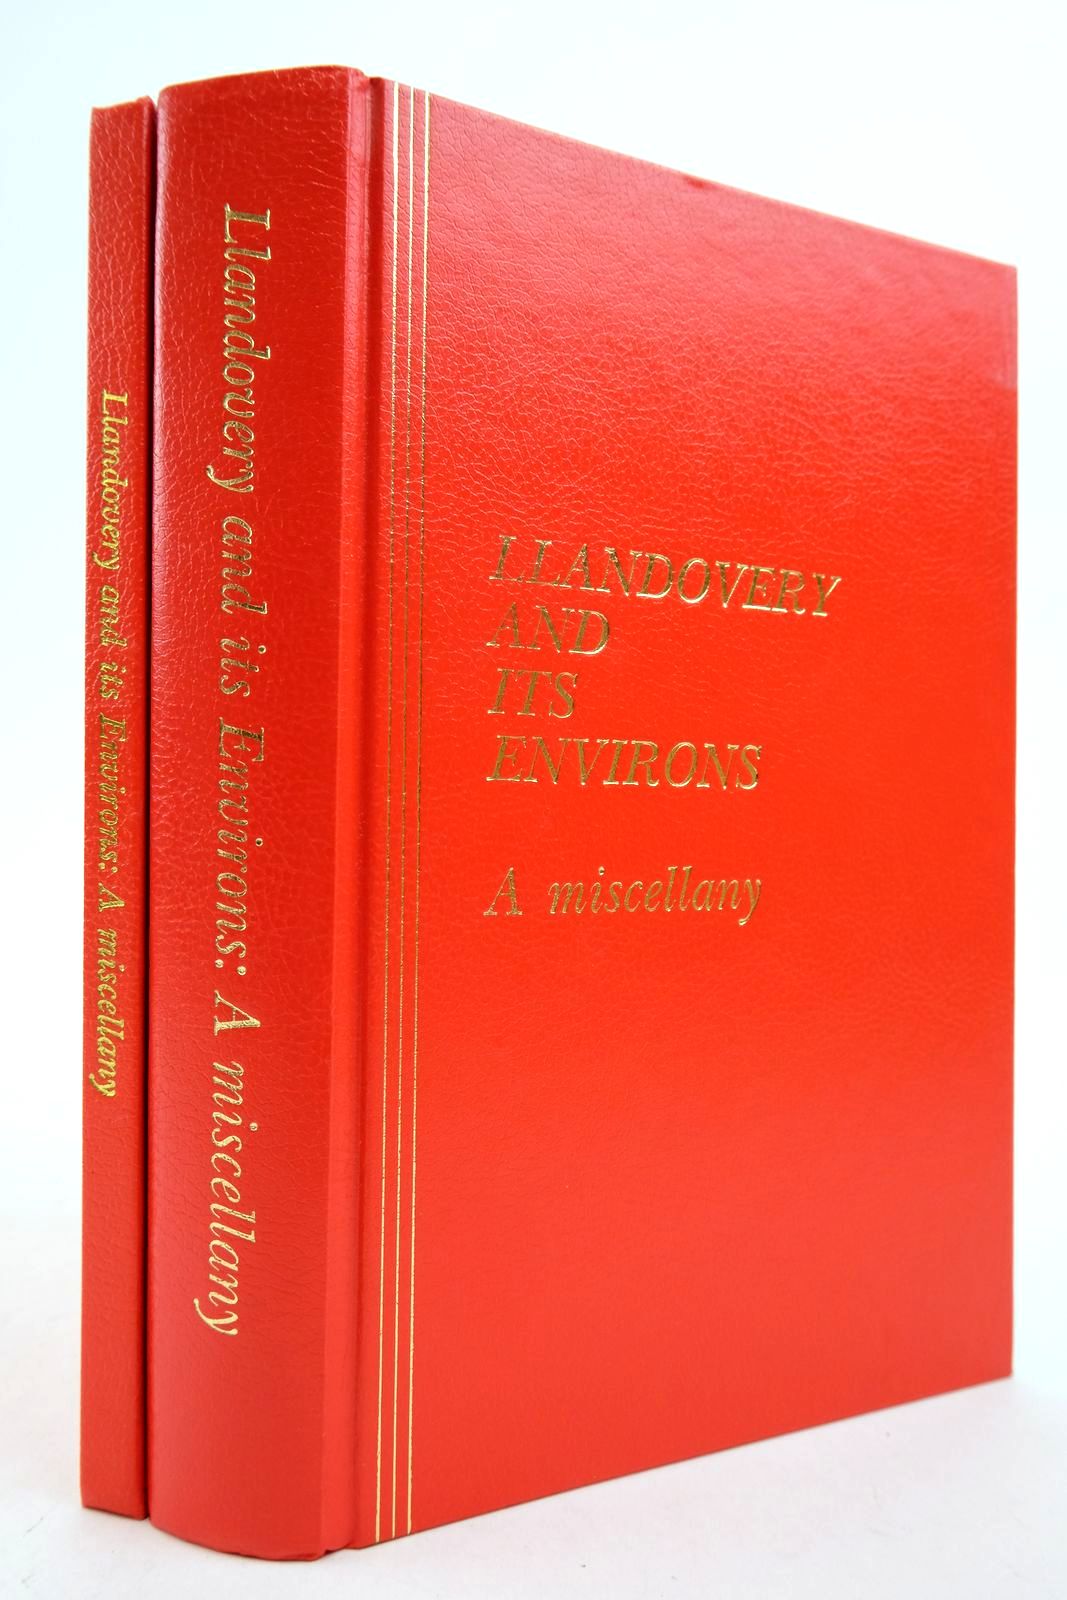 Photo of LLANDOVERY AND ITS ENVIRONS: A MISCELLANY (2 VOLUMES) written by Jones, Sidney et al, published by Friends Of Llandovery Civic Trust Association (STOCK CODE: 2140380)  for sale by Stella & Rose's Books